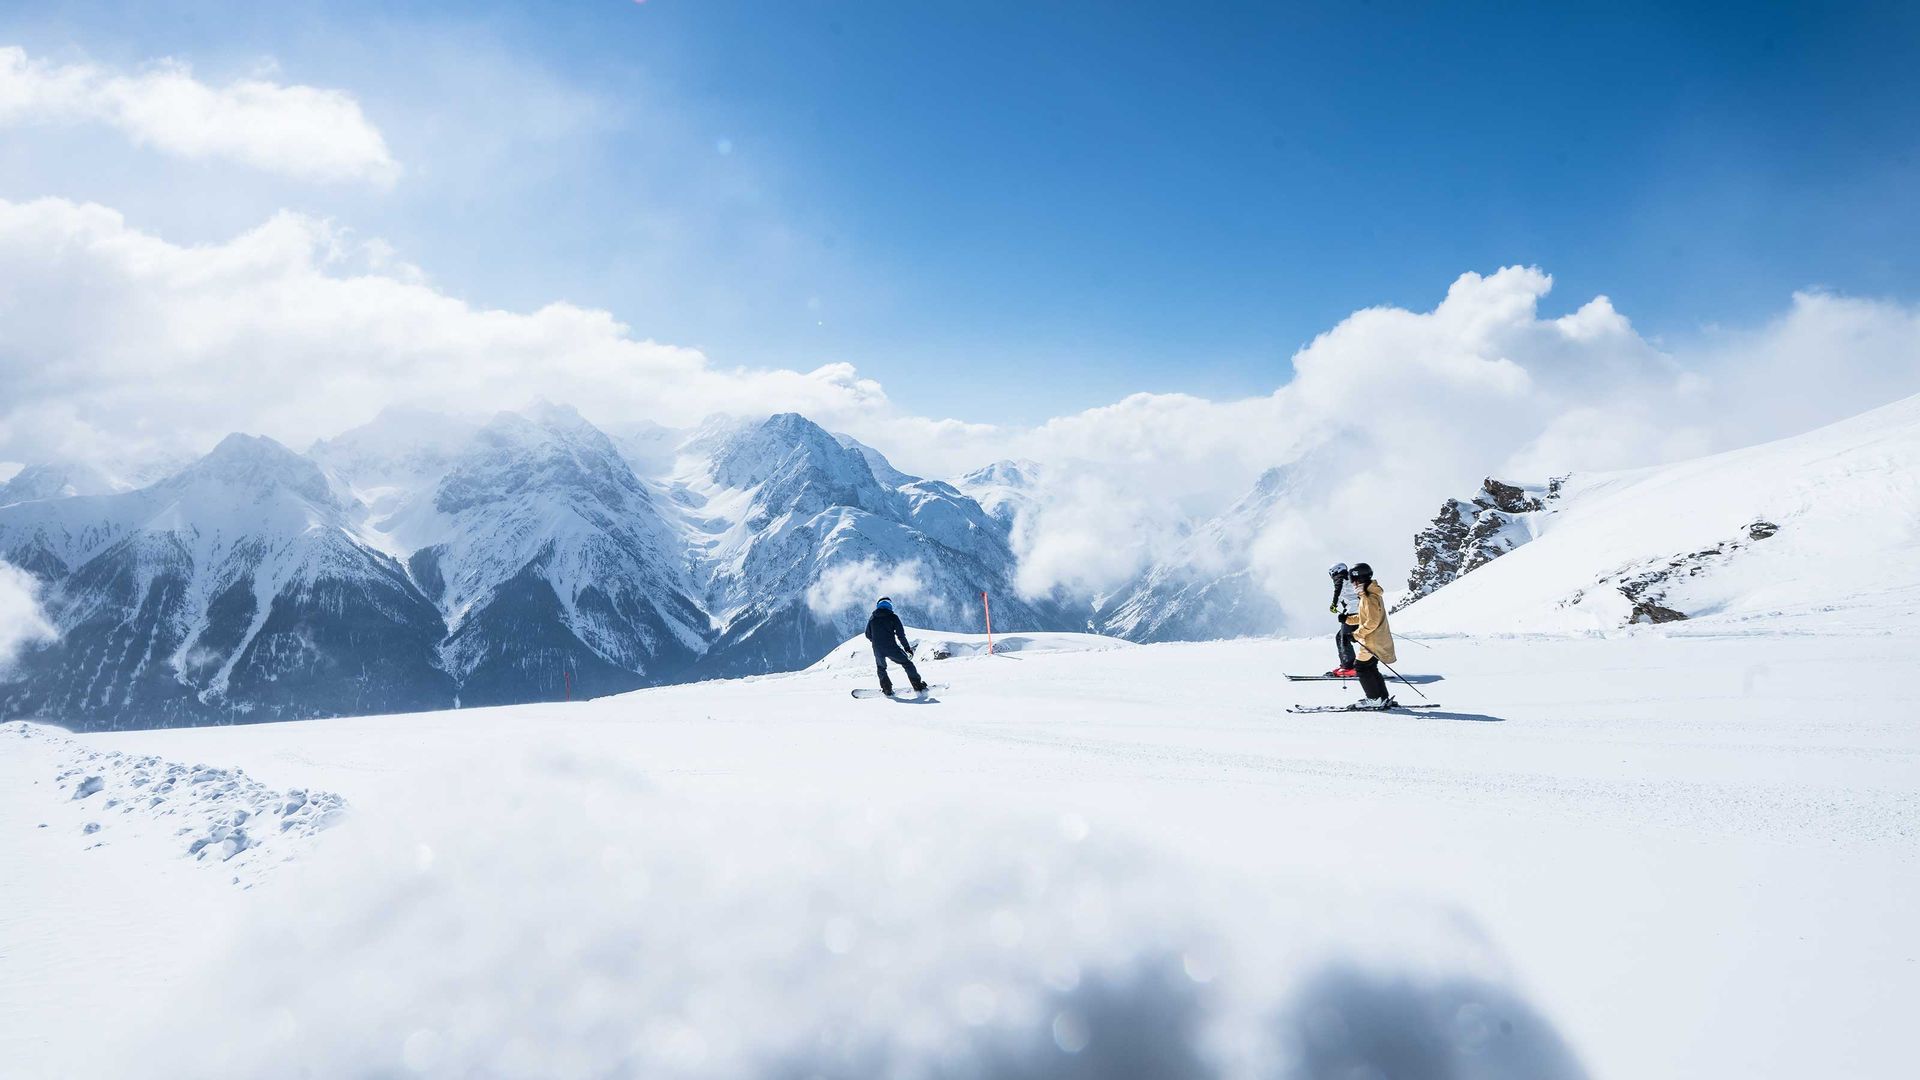 Two skiers descending a snowy mountain slope with scenic mountain peaks and clouds in the background.